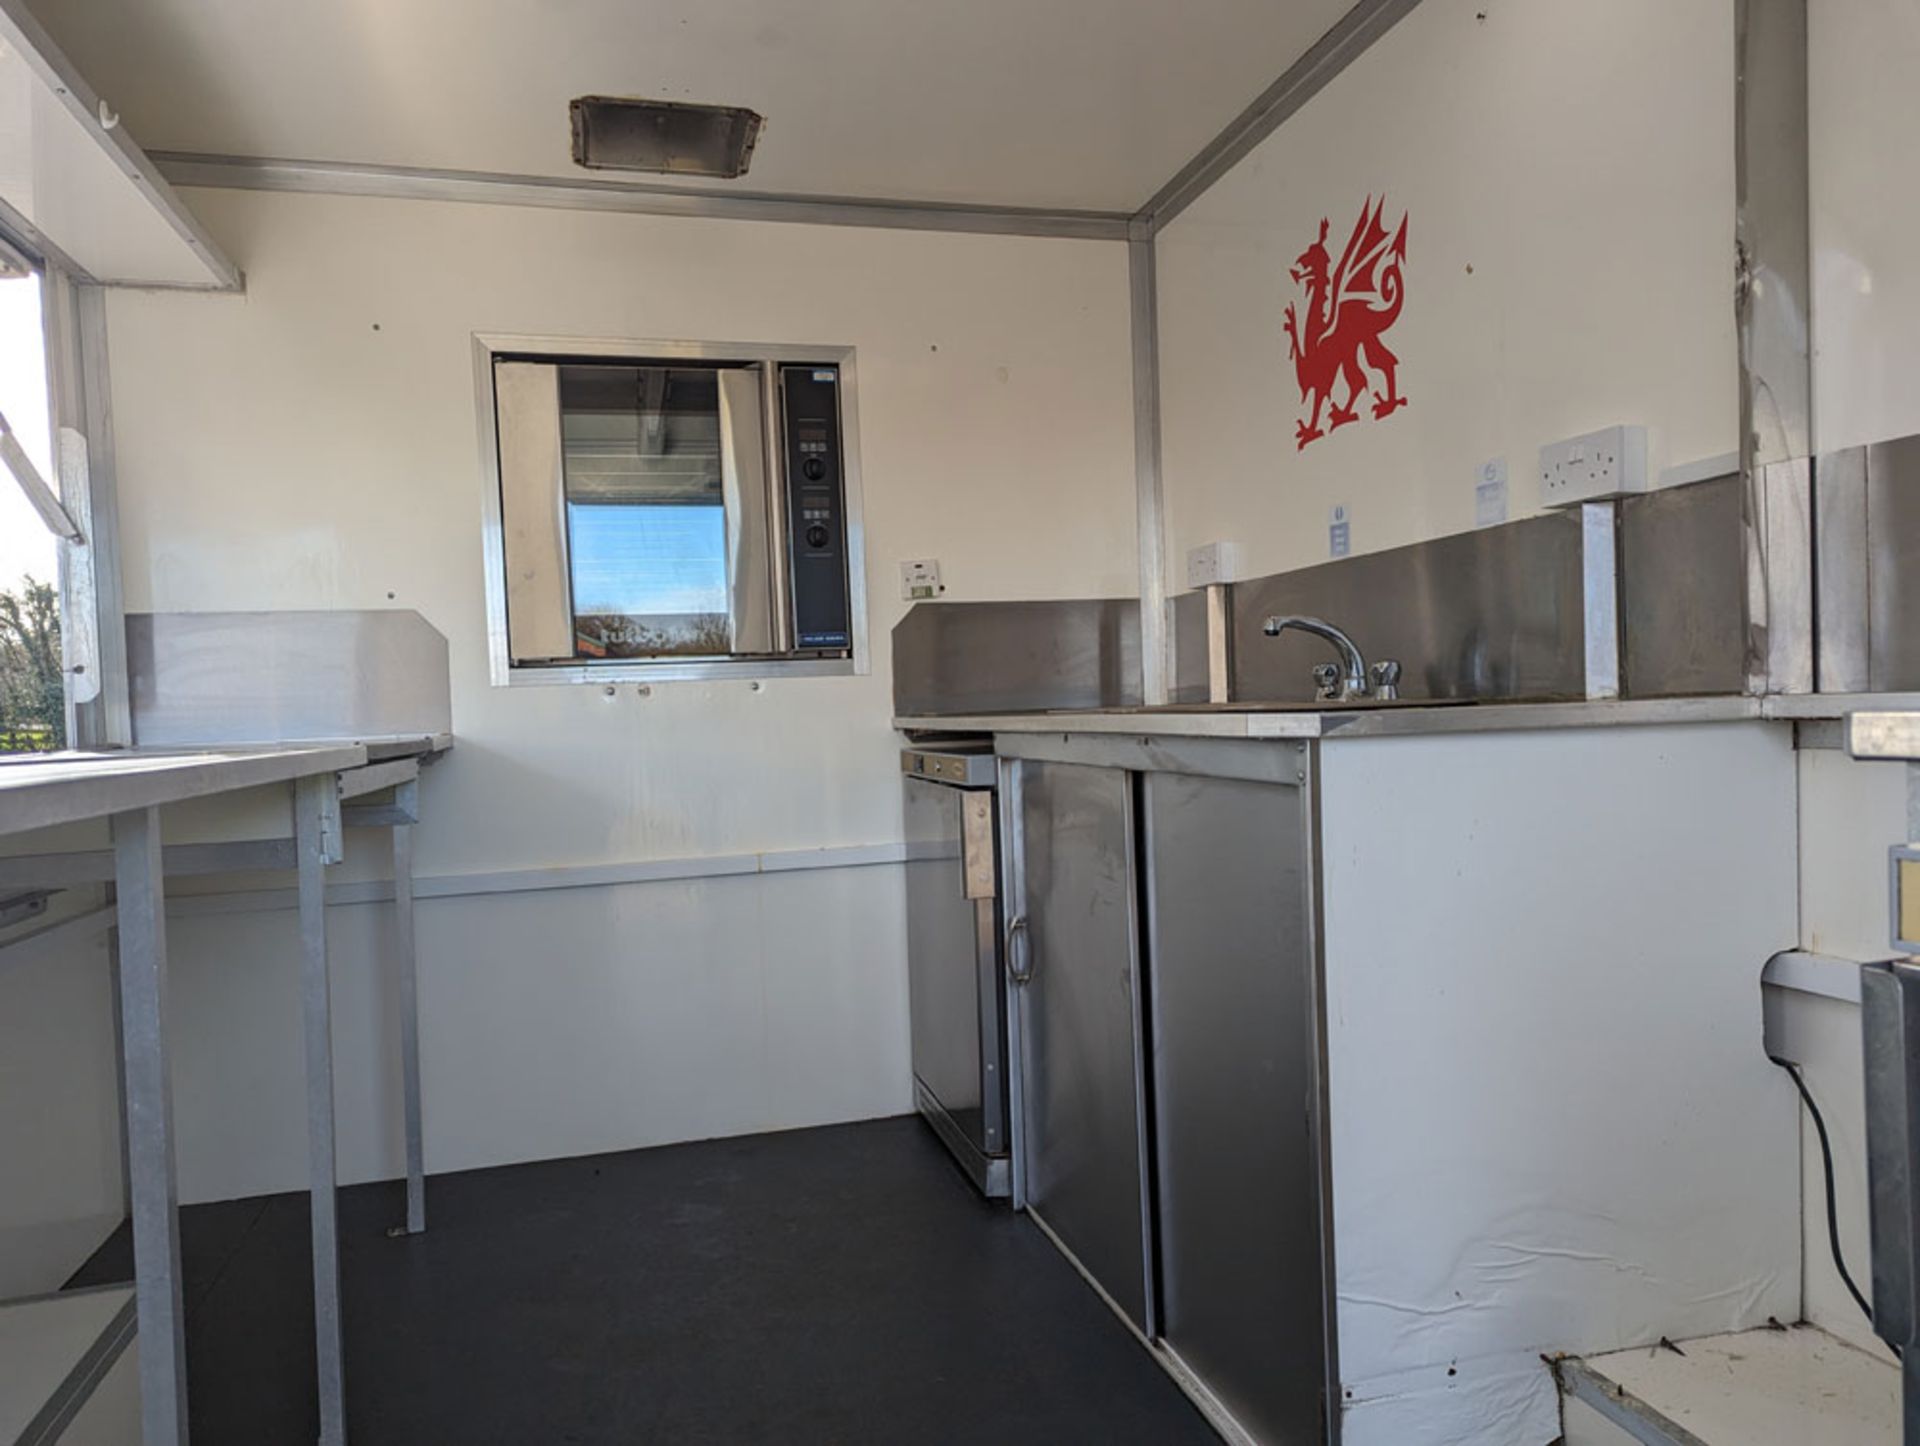 Catering Trailer. - Image 6 of 18